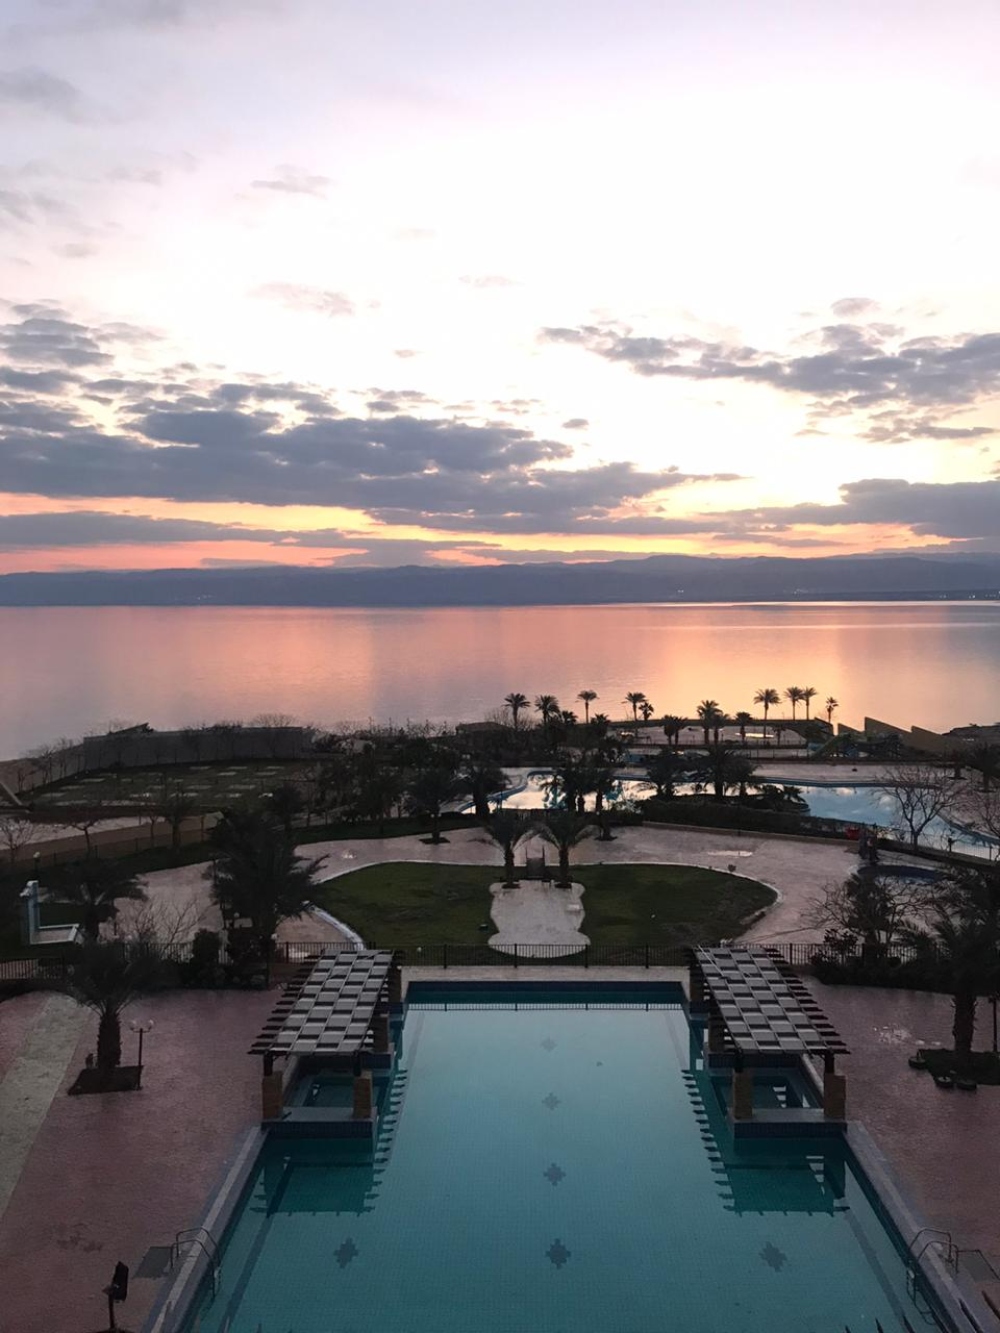 Thousands of travelers are being hosted in Dead Sea resorts for two weeks to ensure they are not carrying the coronavirus (Photo courtesy of Banan Qottous)